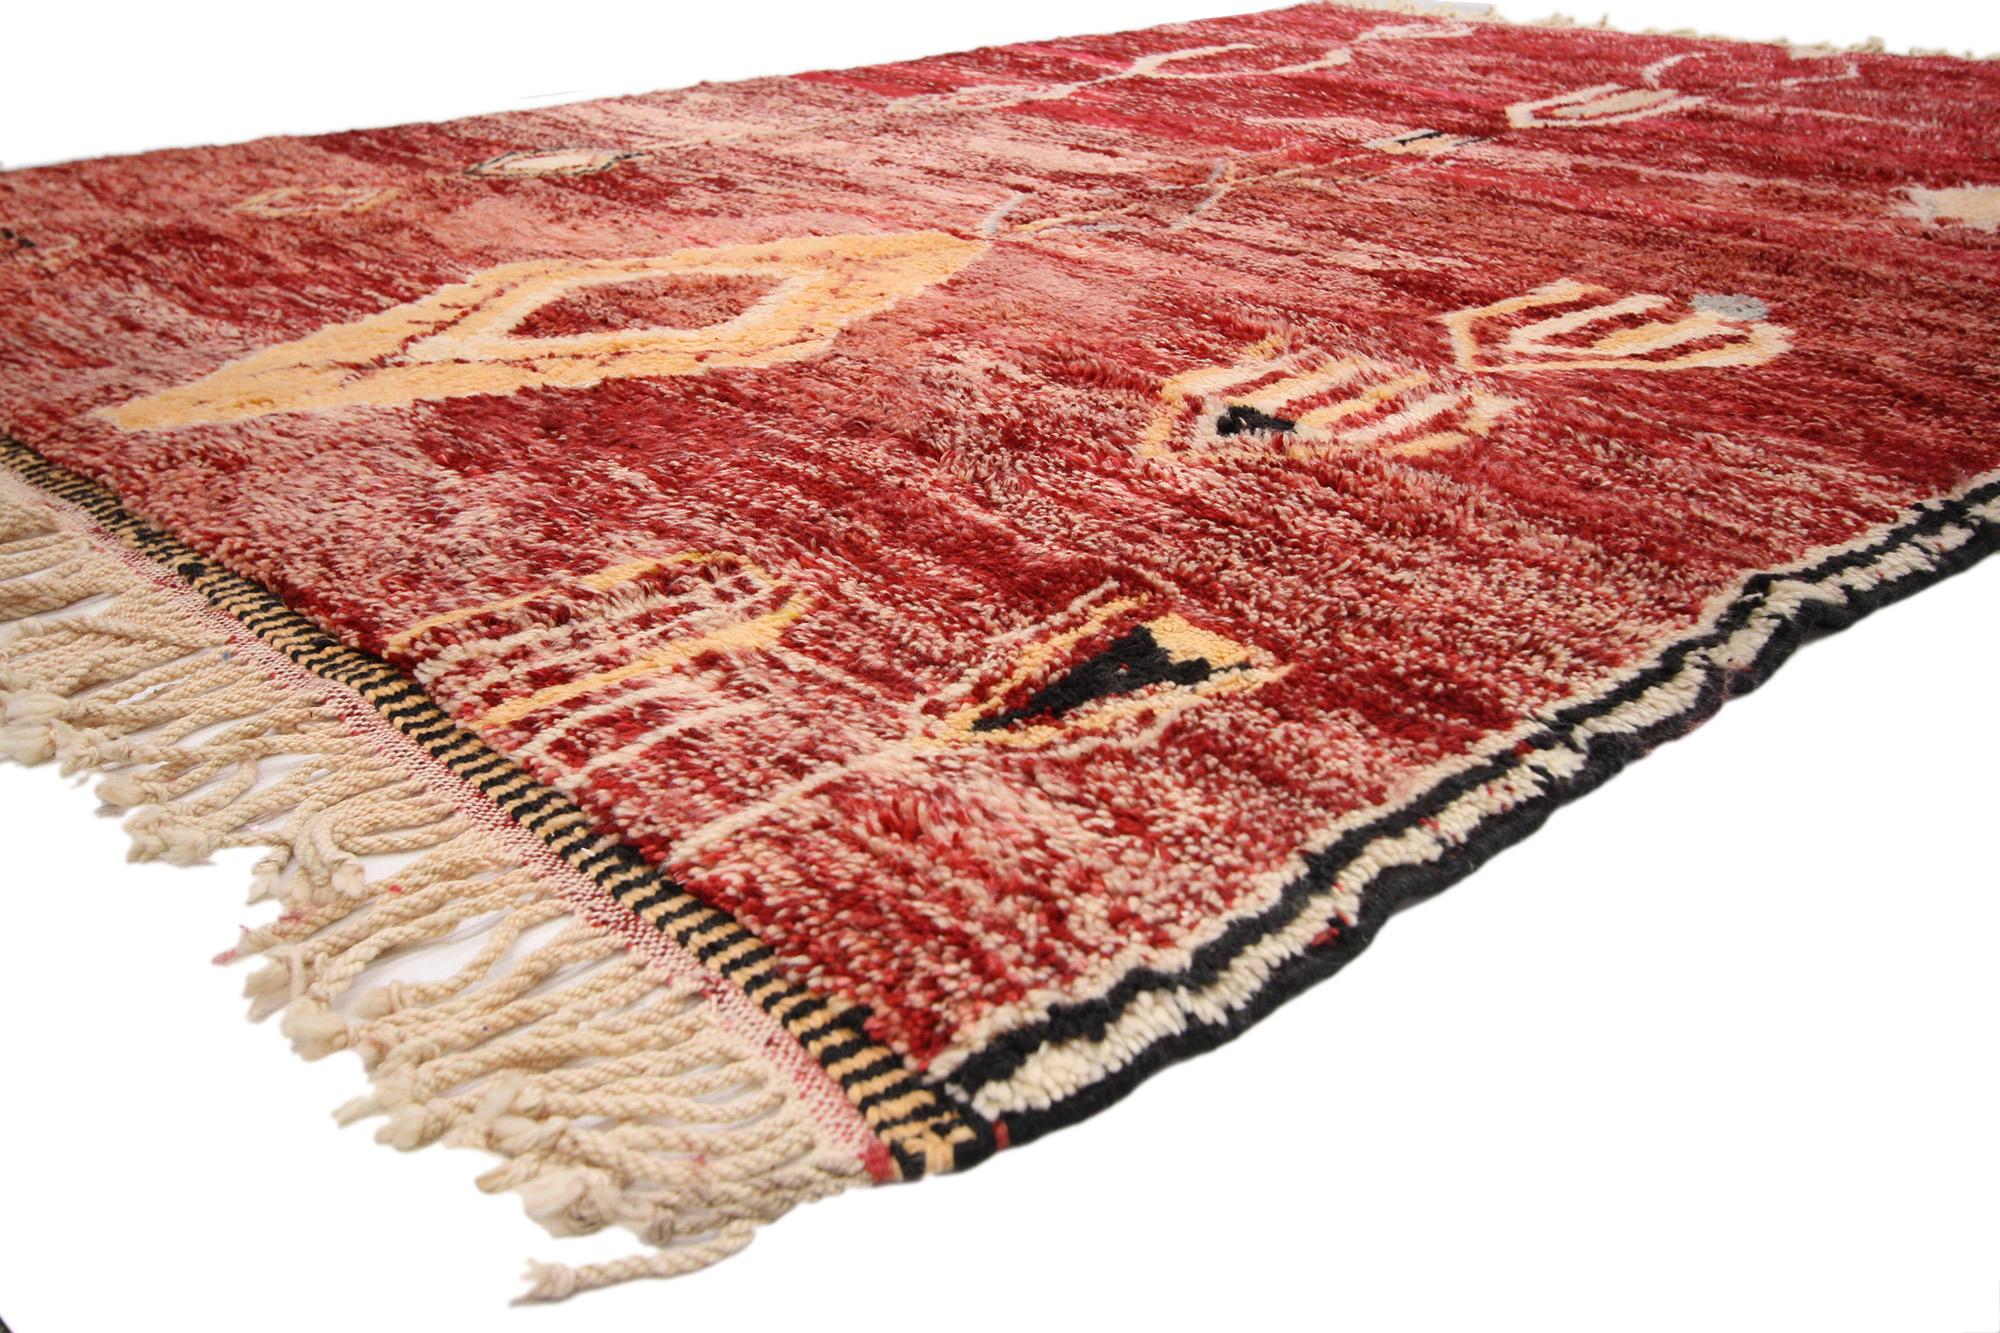 20732 Vintage Red Beni Mrirt Moroccan Rug, 06'10 x 09'09. Beni Mrirt rugs embody the cherished tradition of Moroccan weaving, renowned for their sumptuous texture, geometric designs, and serene earthy tones. Handcrafted by skilled artisans of the